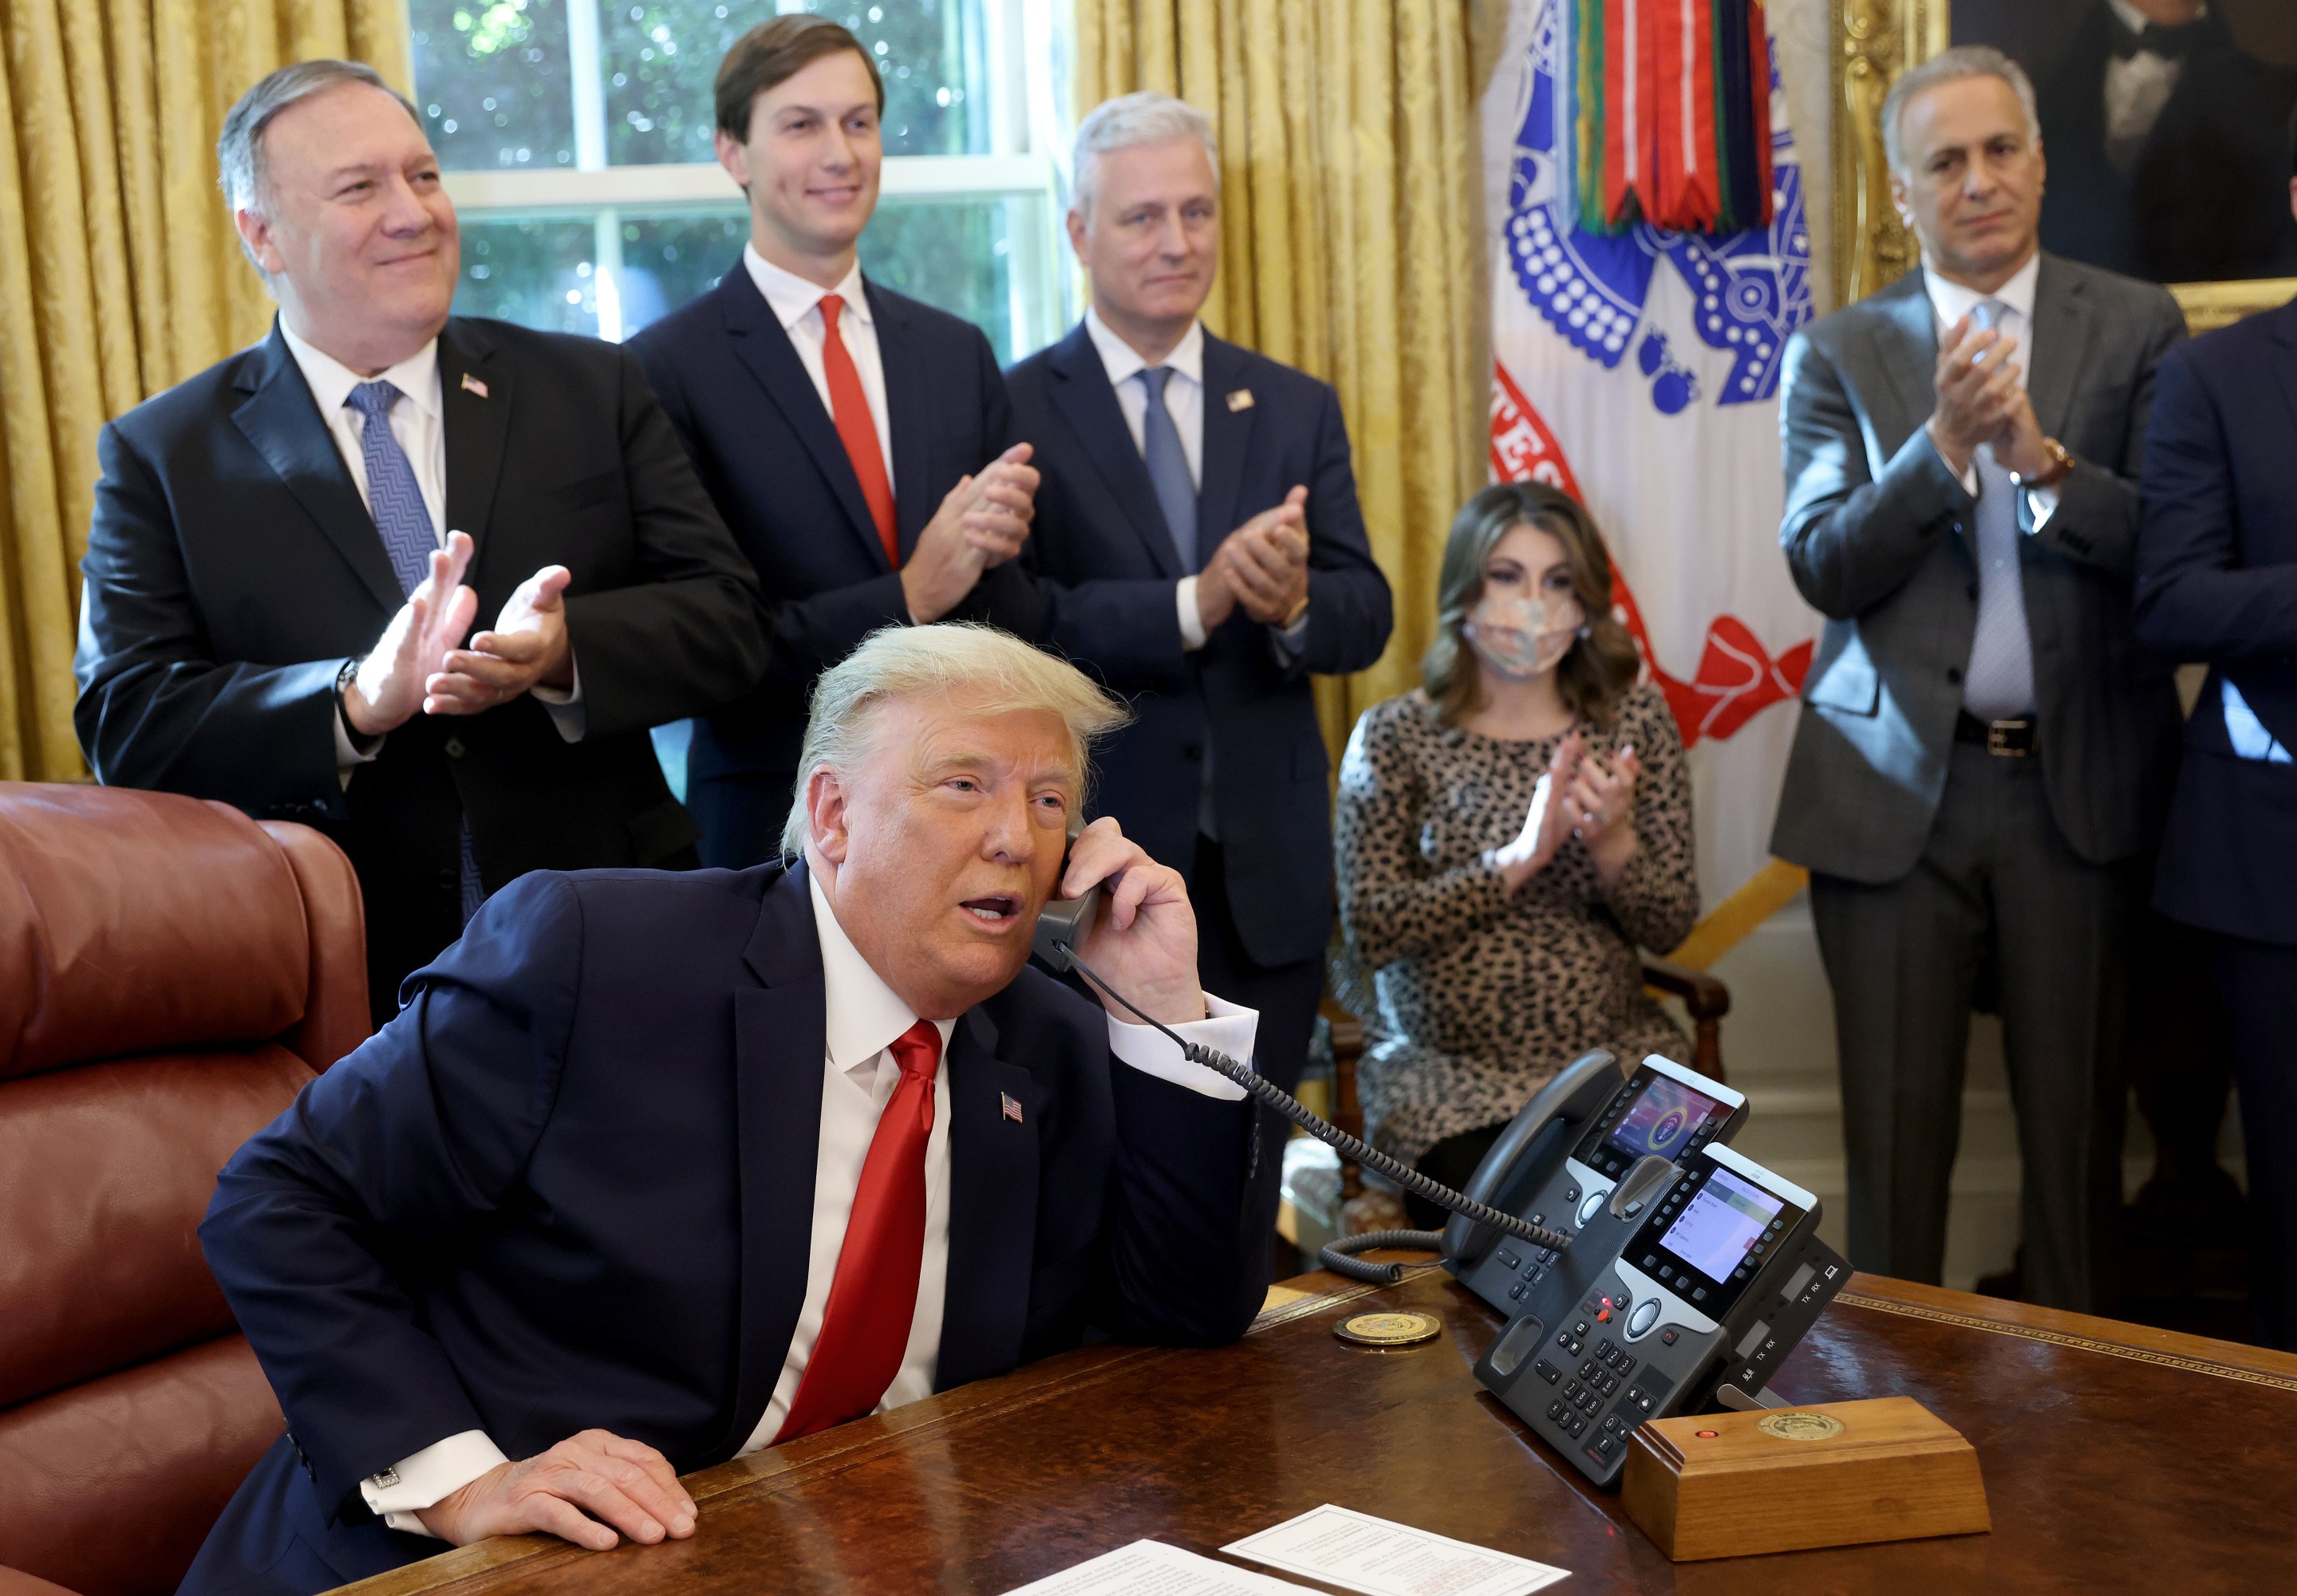 Donald Trump on the phone being applauded by lackeys, presumably not for farting.